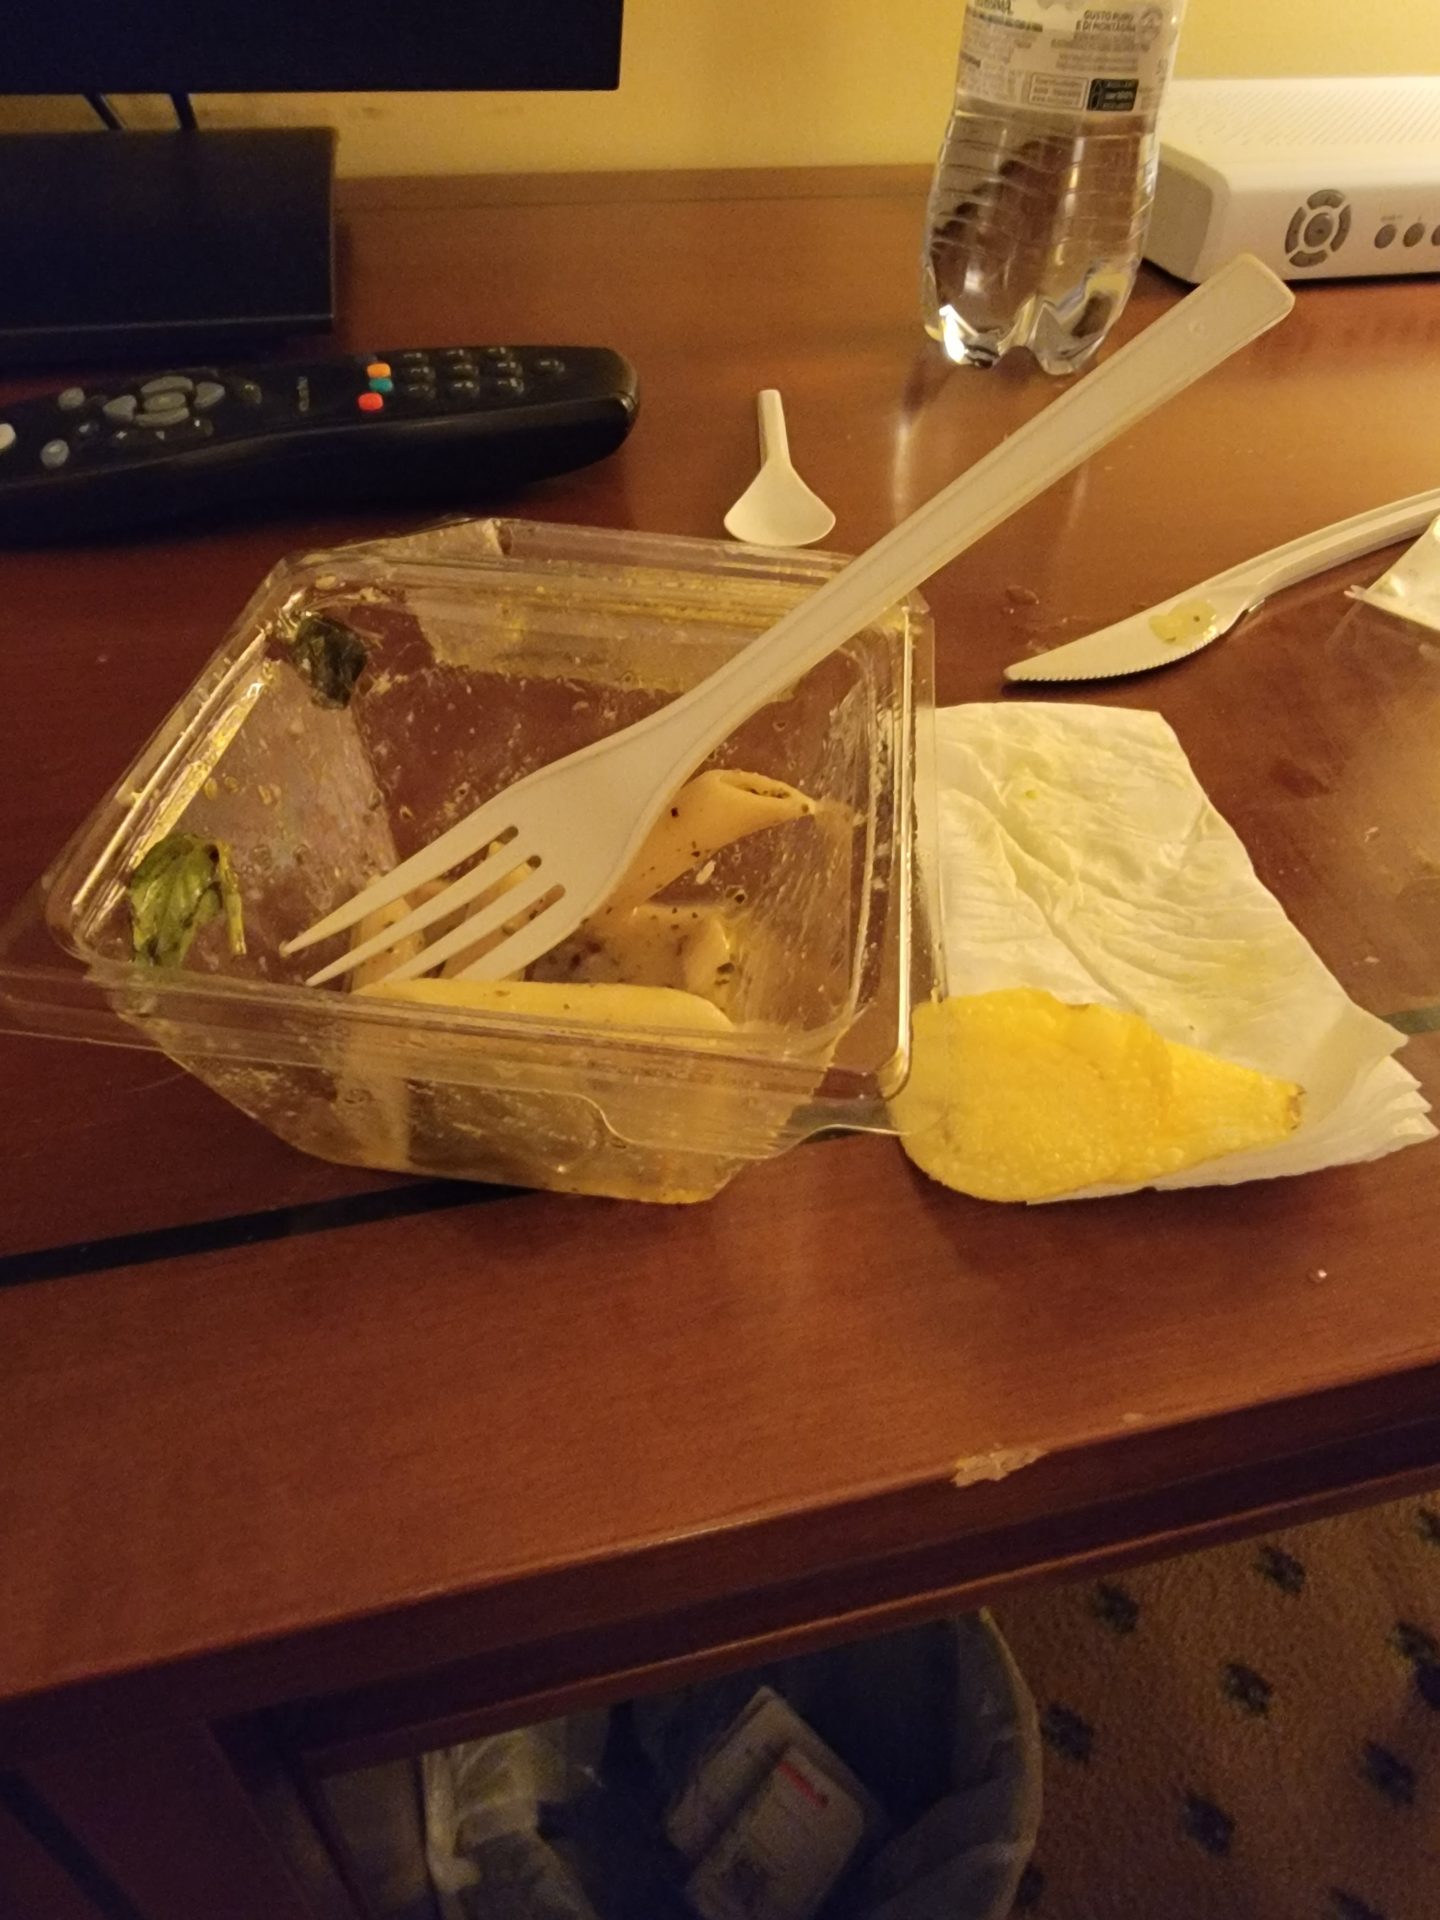 a plastic container with food in it